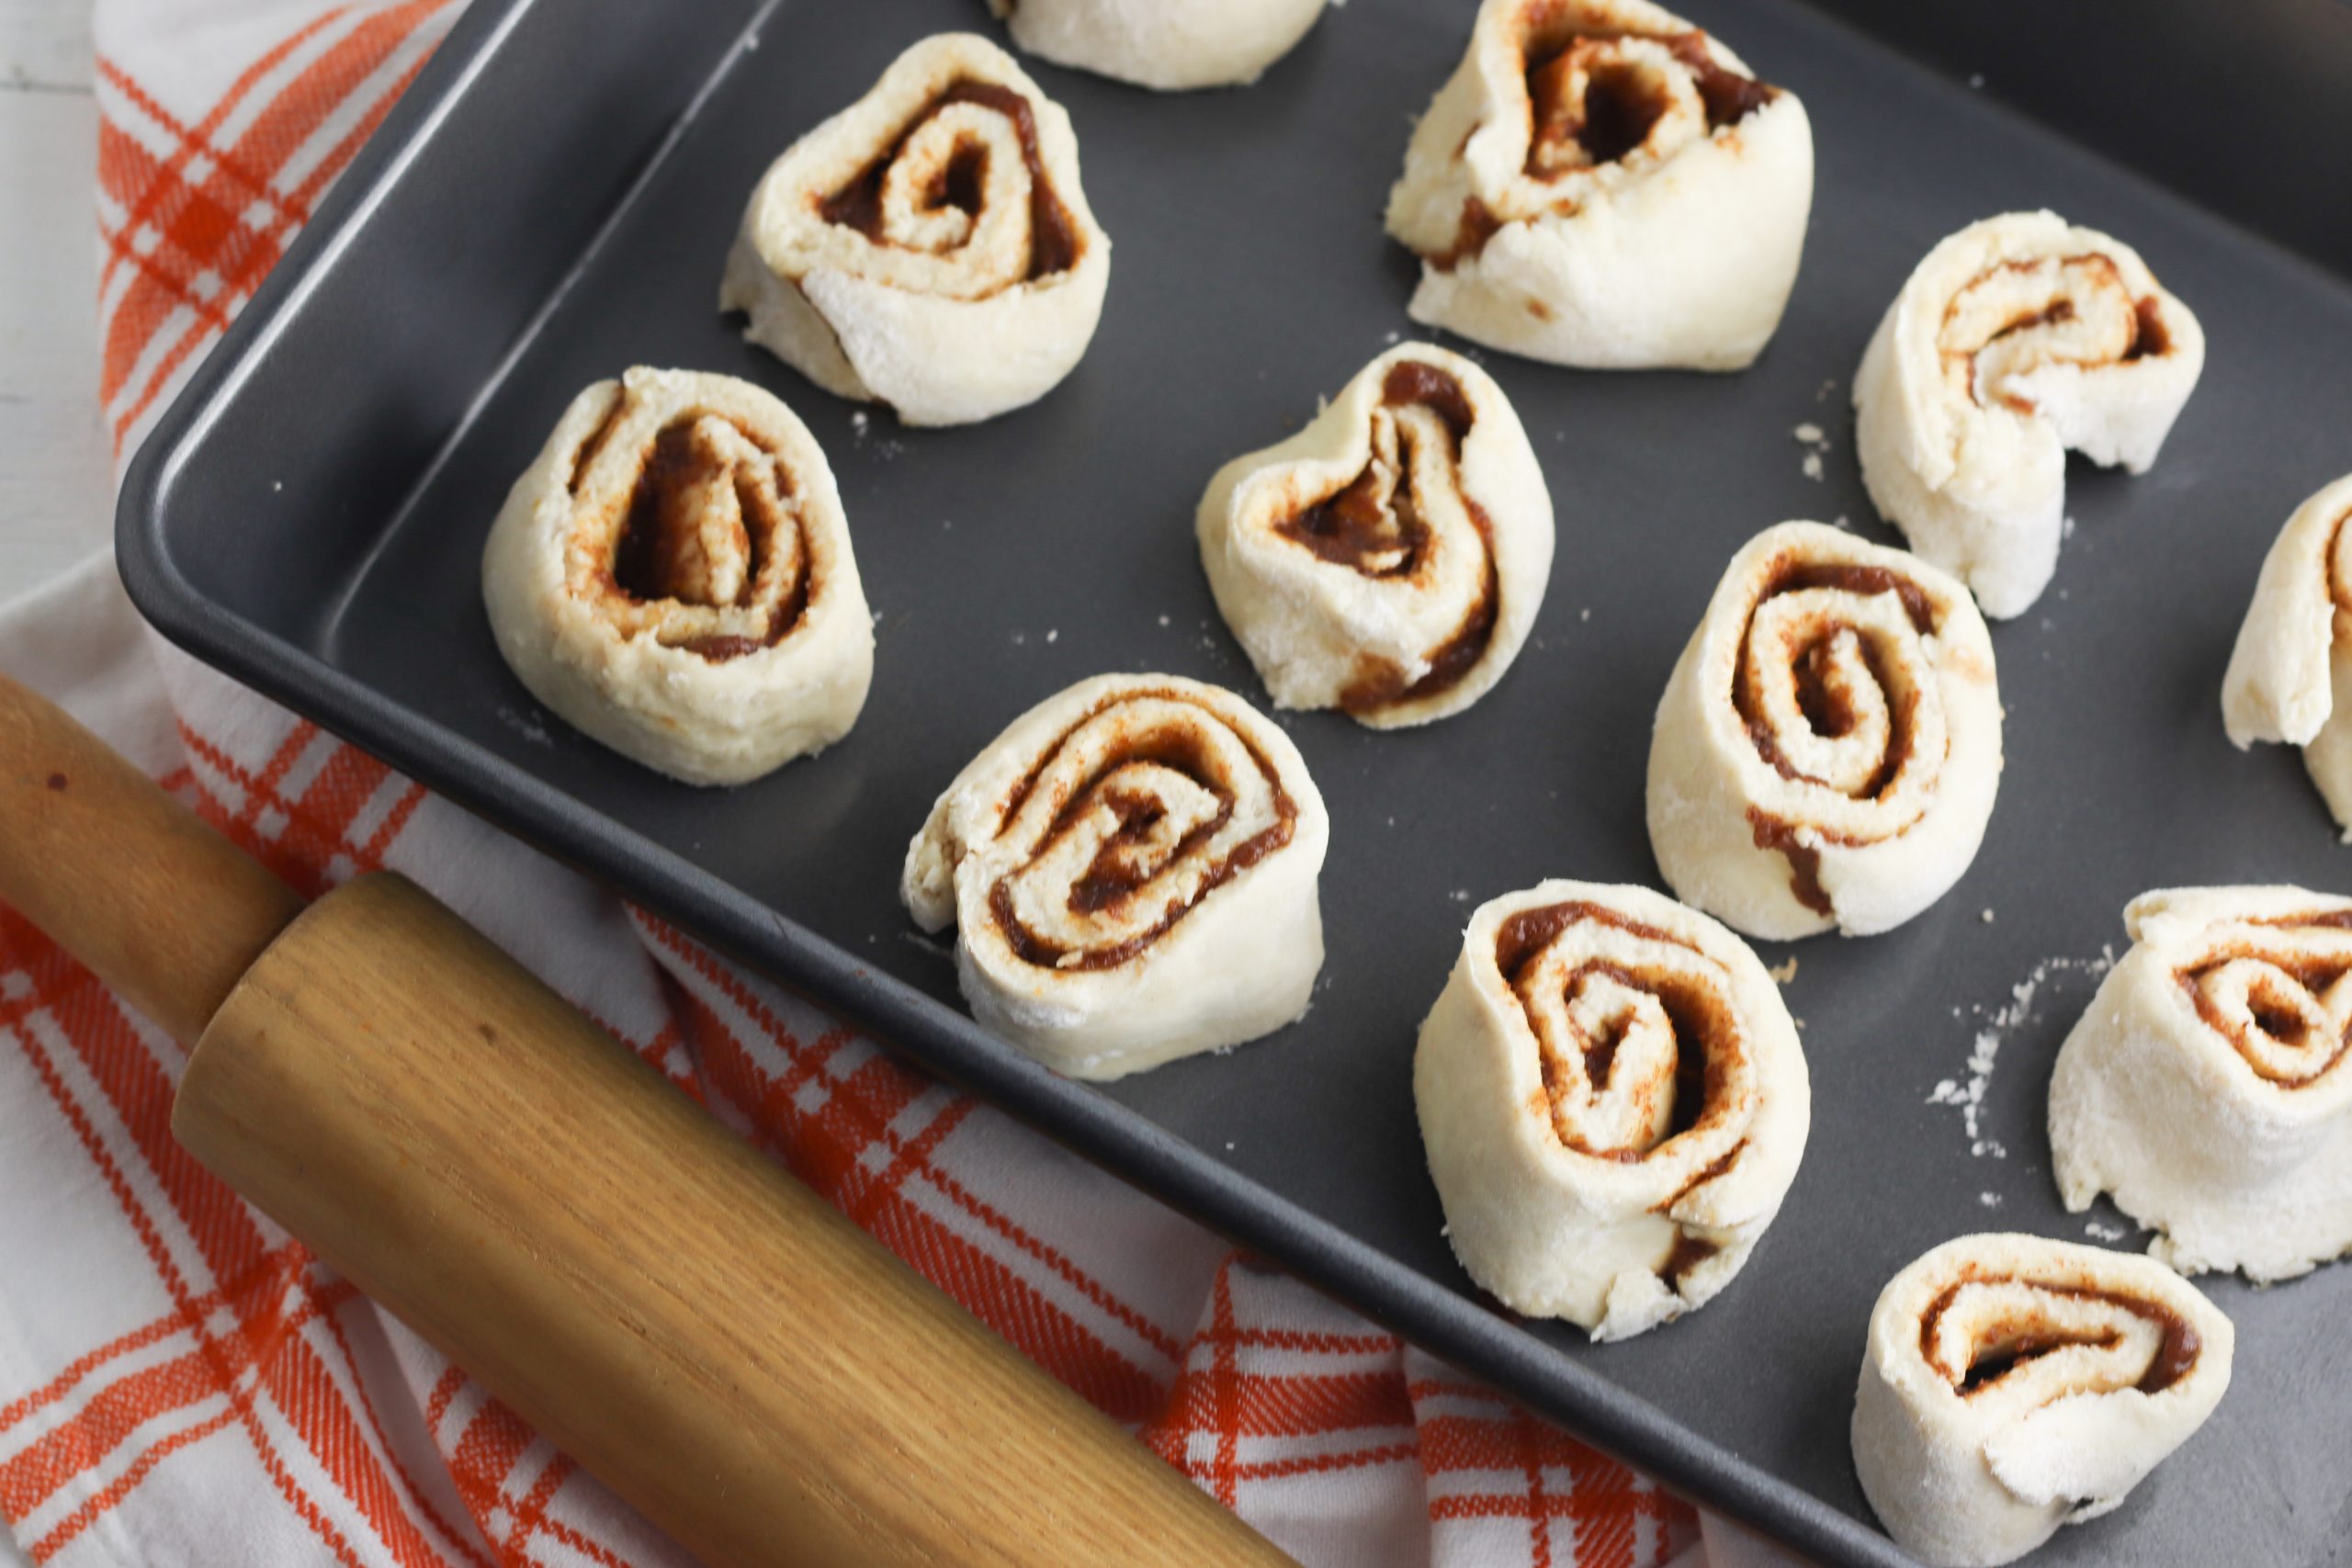 Pumpkin cinnamon rolls instructions include slicing the roll of dough and rolling them up on oven pan.